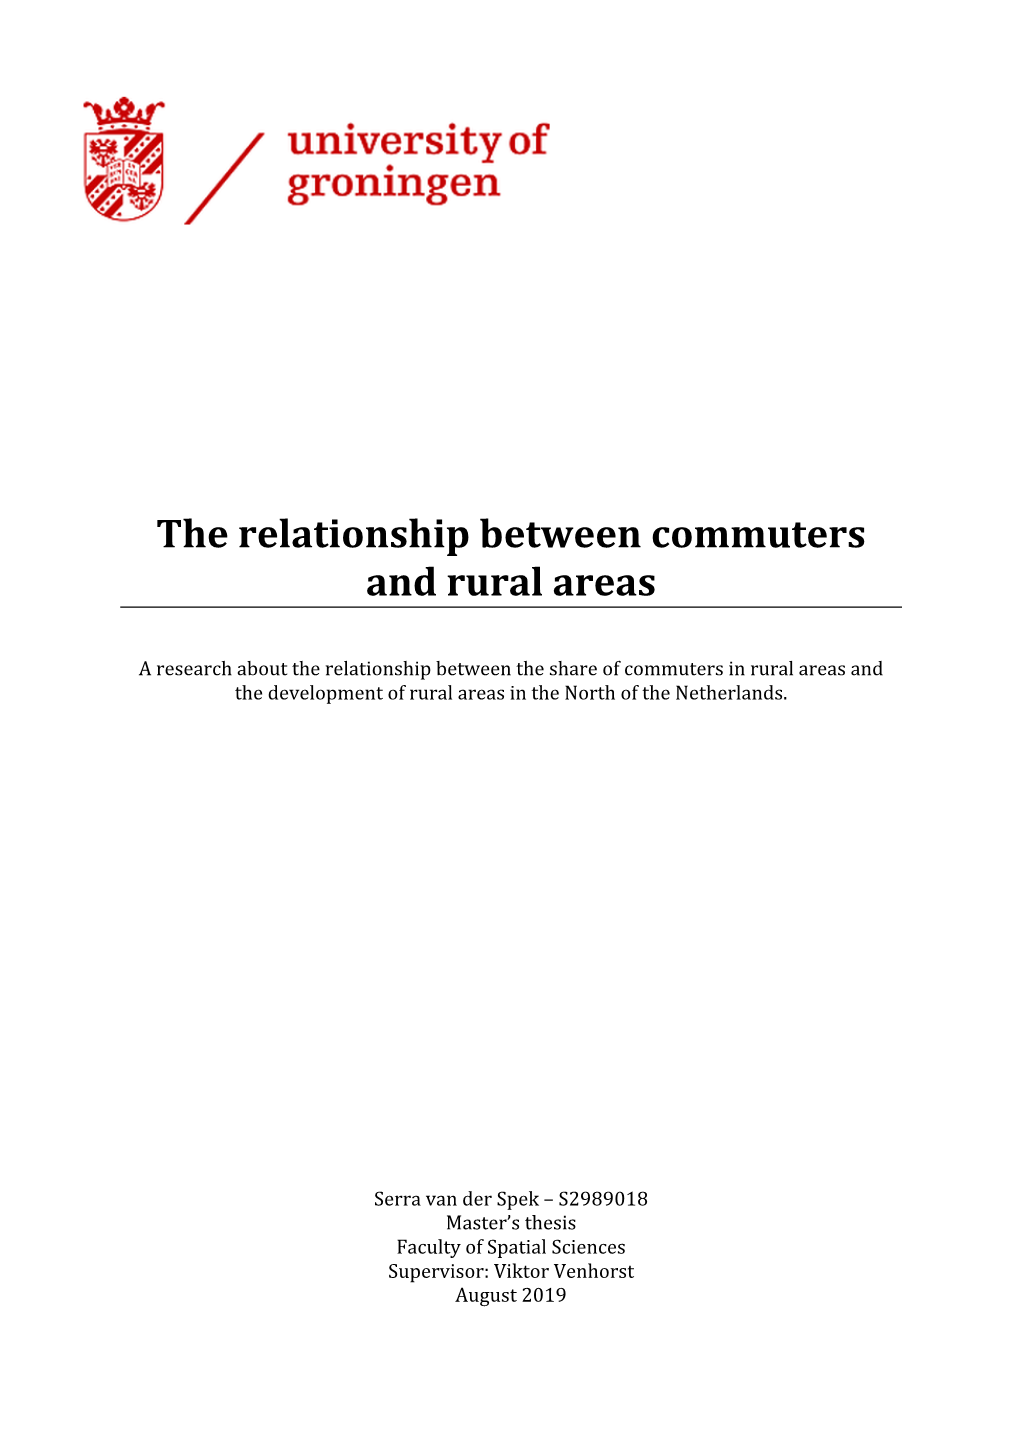 The Relationship Between Commuters and Rural Areas